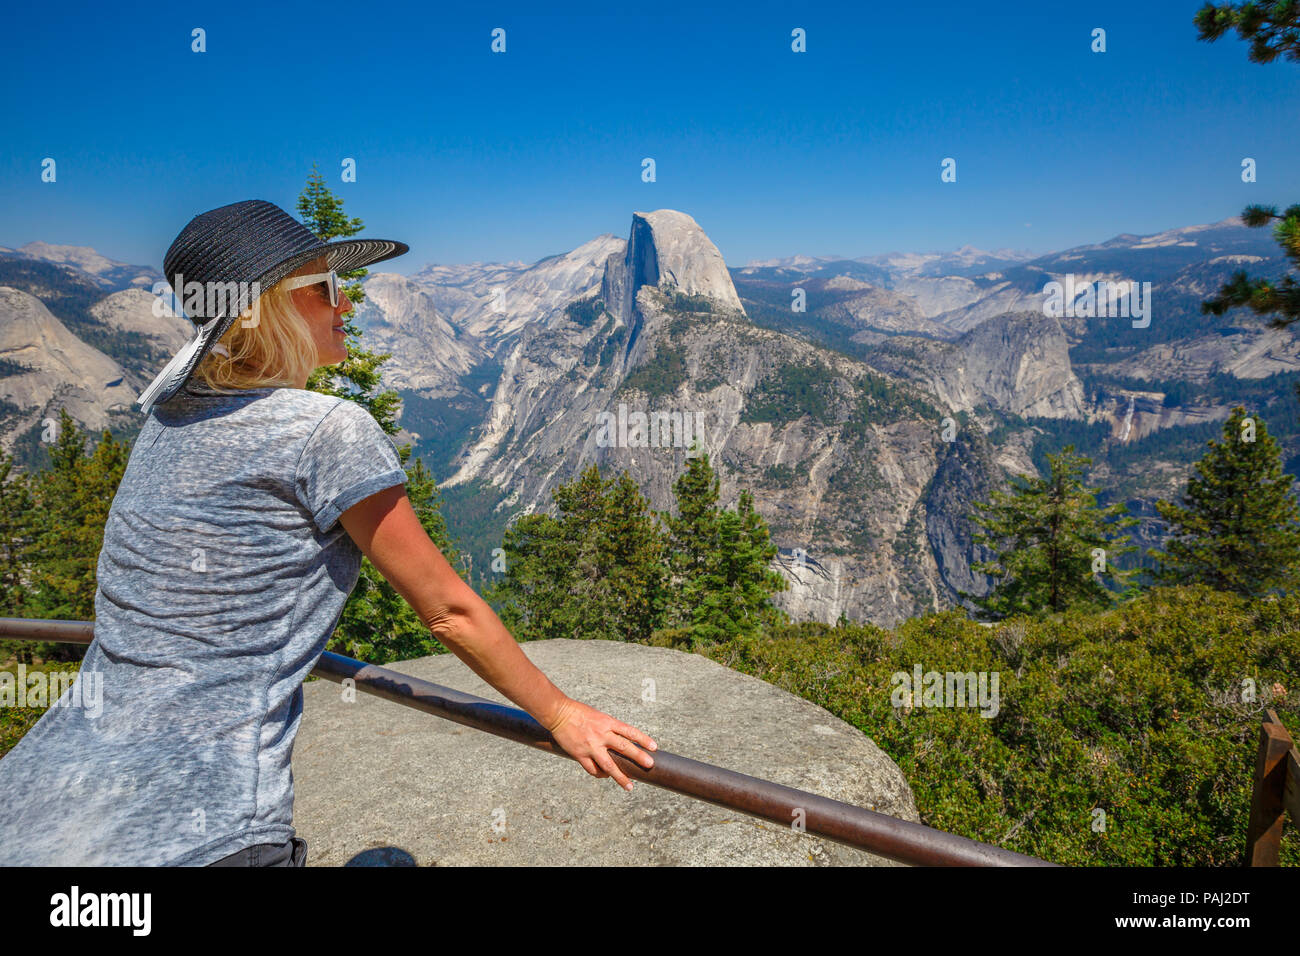 Traveler lifestyle woman with hat contemplating Glacier Point in Yosemite National Park. Relaxing at popular Half Dome from Glacier Point overlook. American travel holidays concept. California, USA. Stock Photo